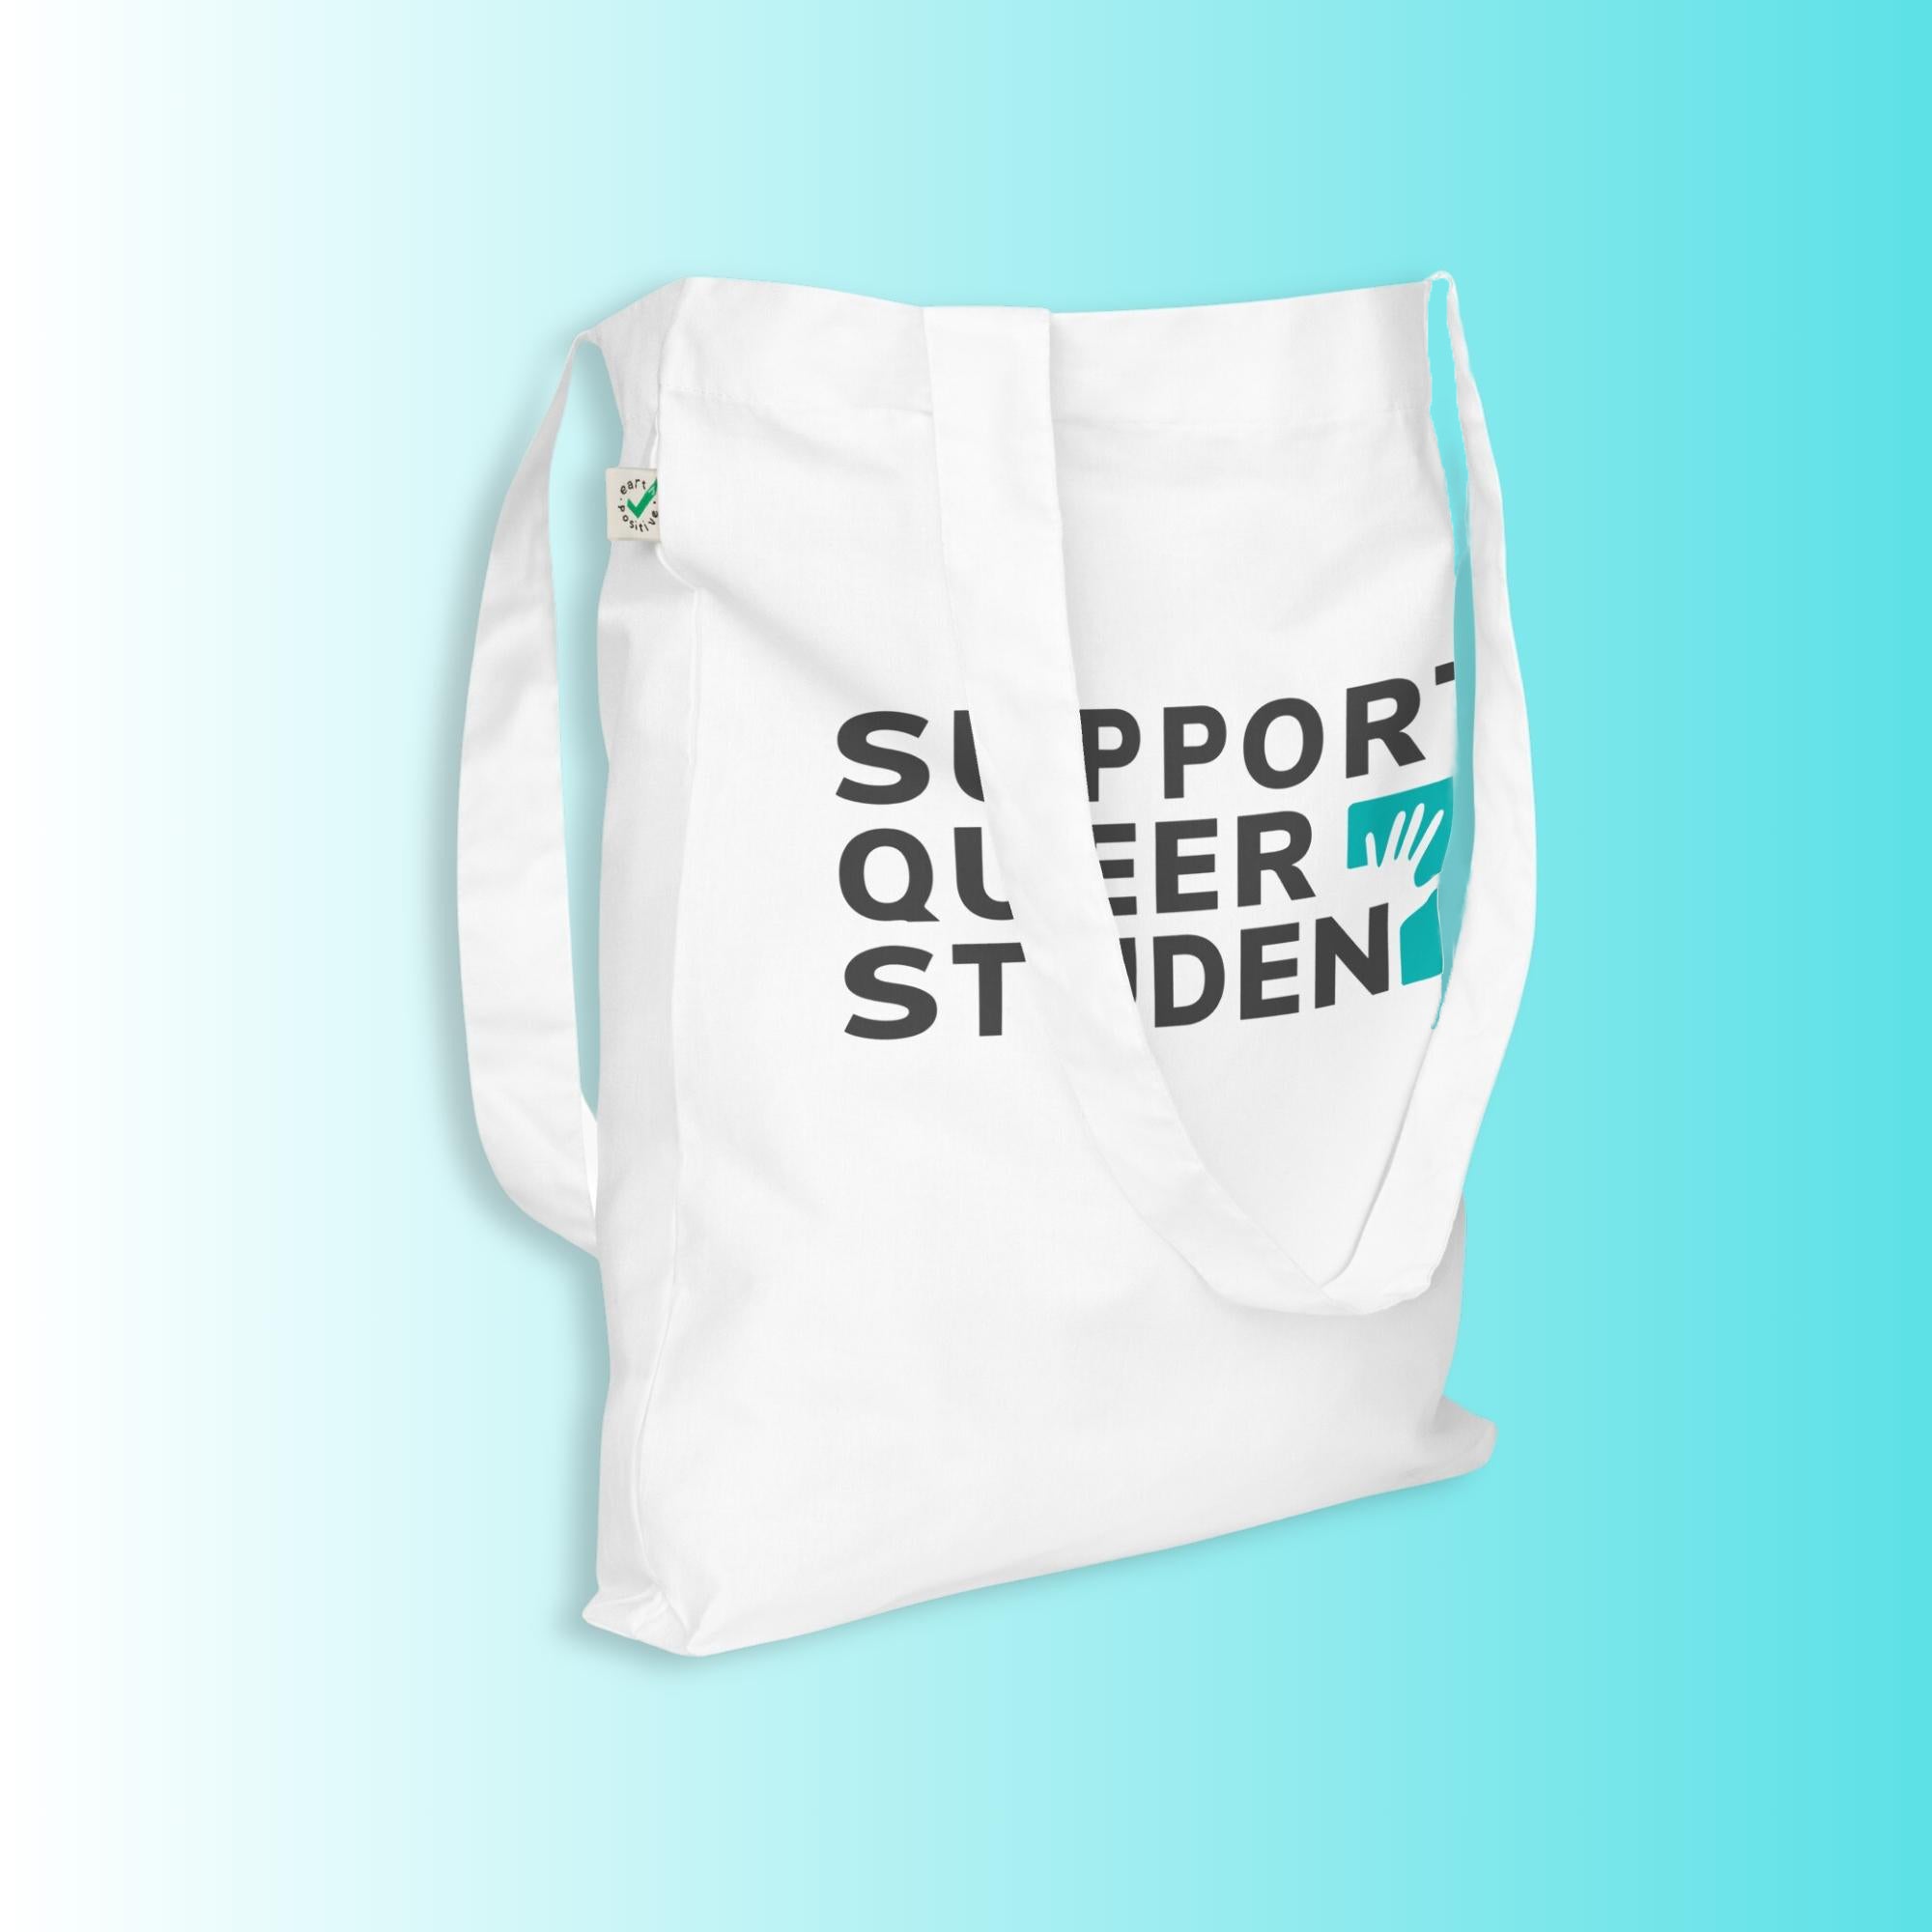 Support Queer Students Lightweight Organic Tote – Vivid Teal 'T'